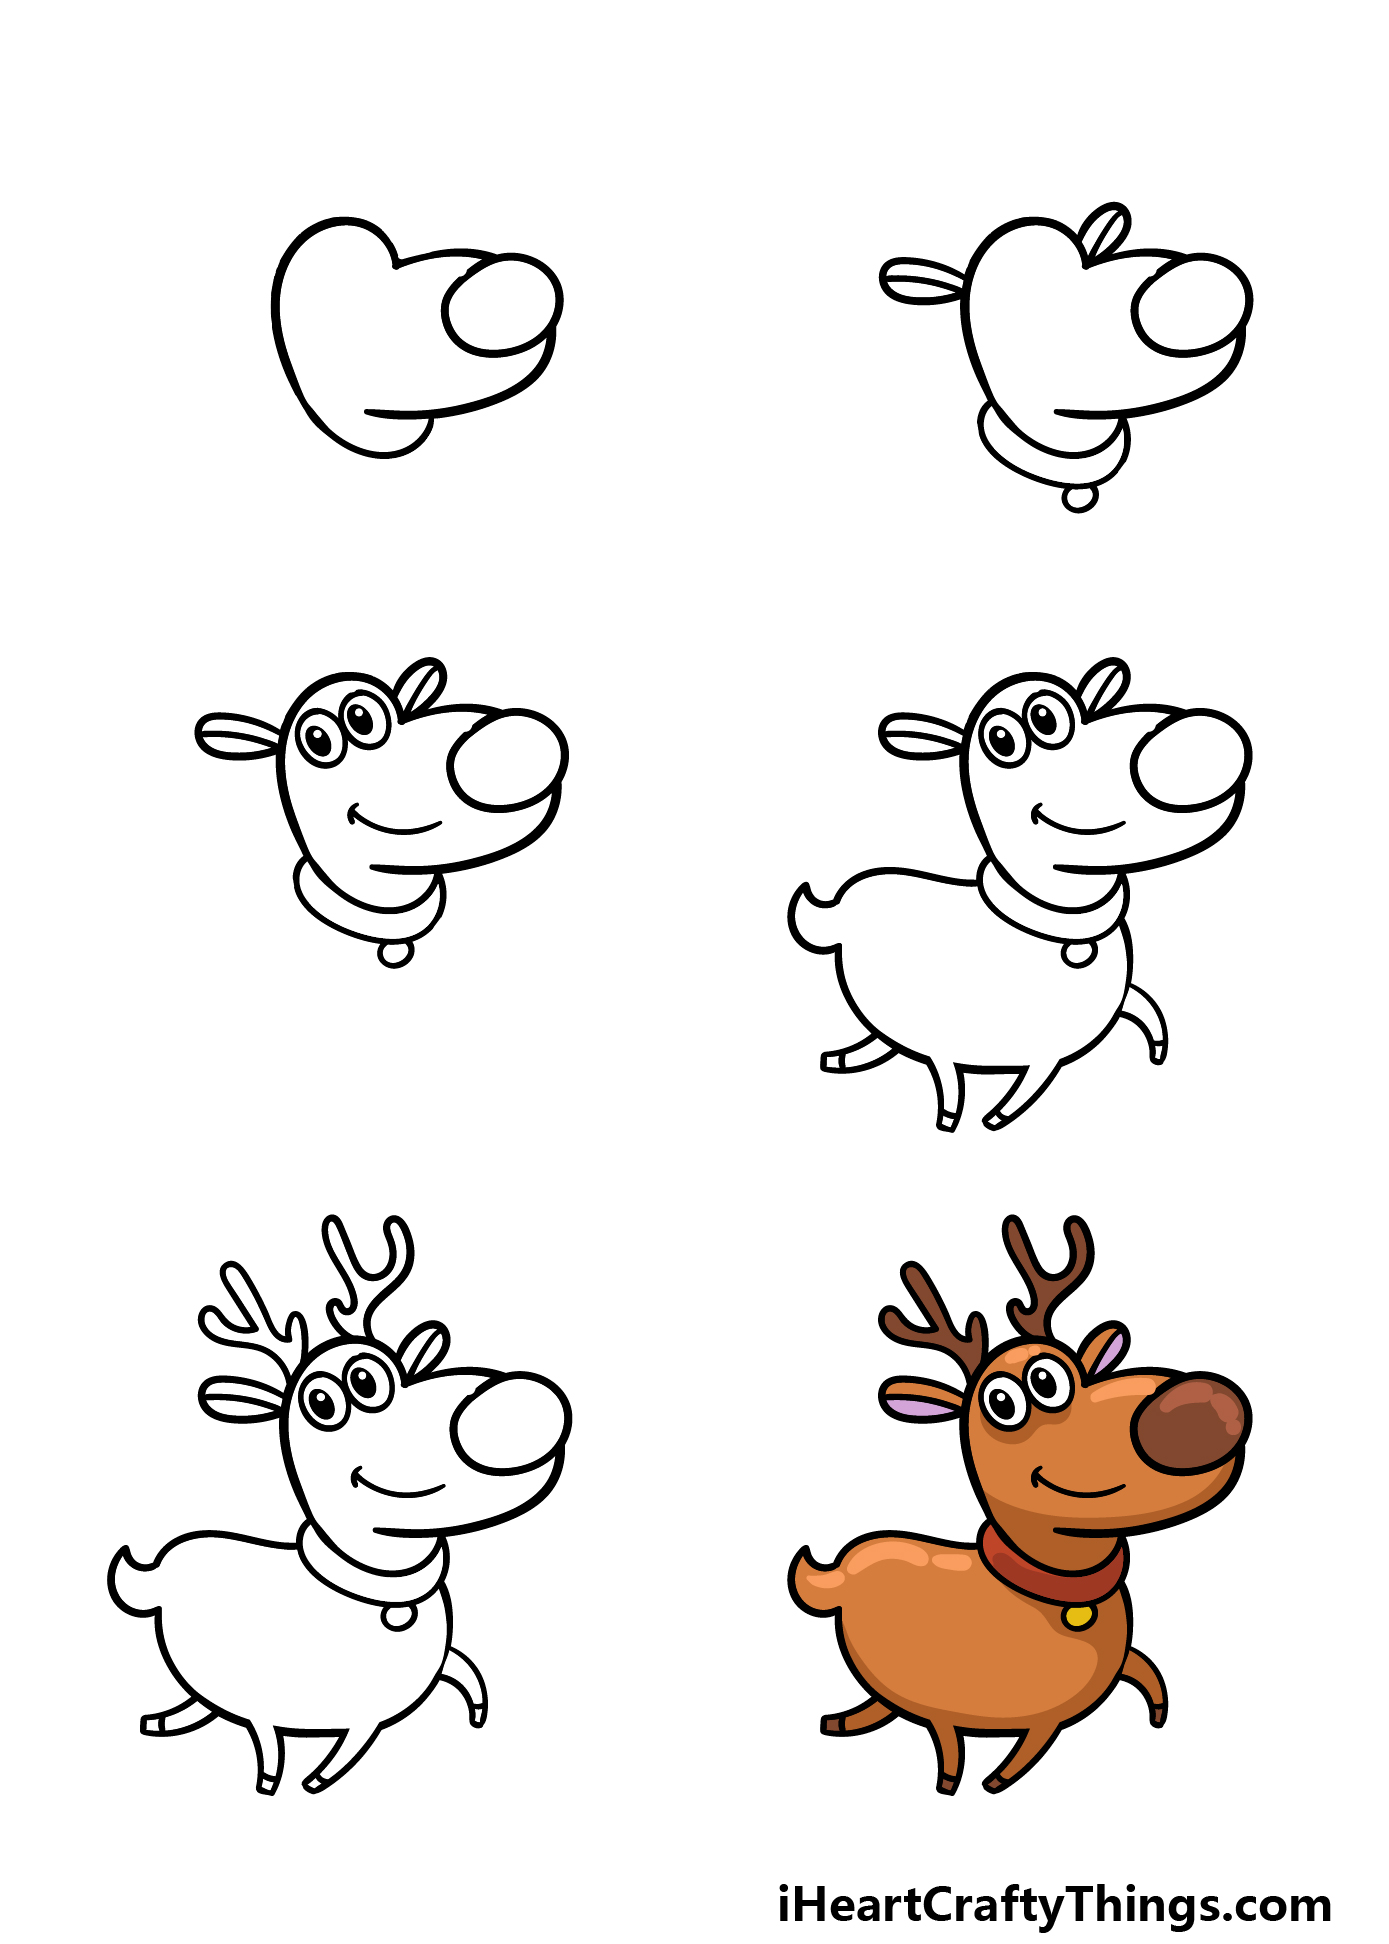 how to draw a cartoon reindeer in 6 steps